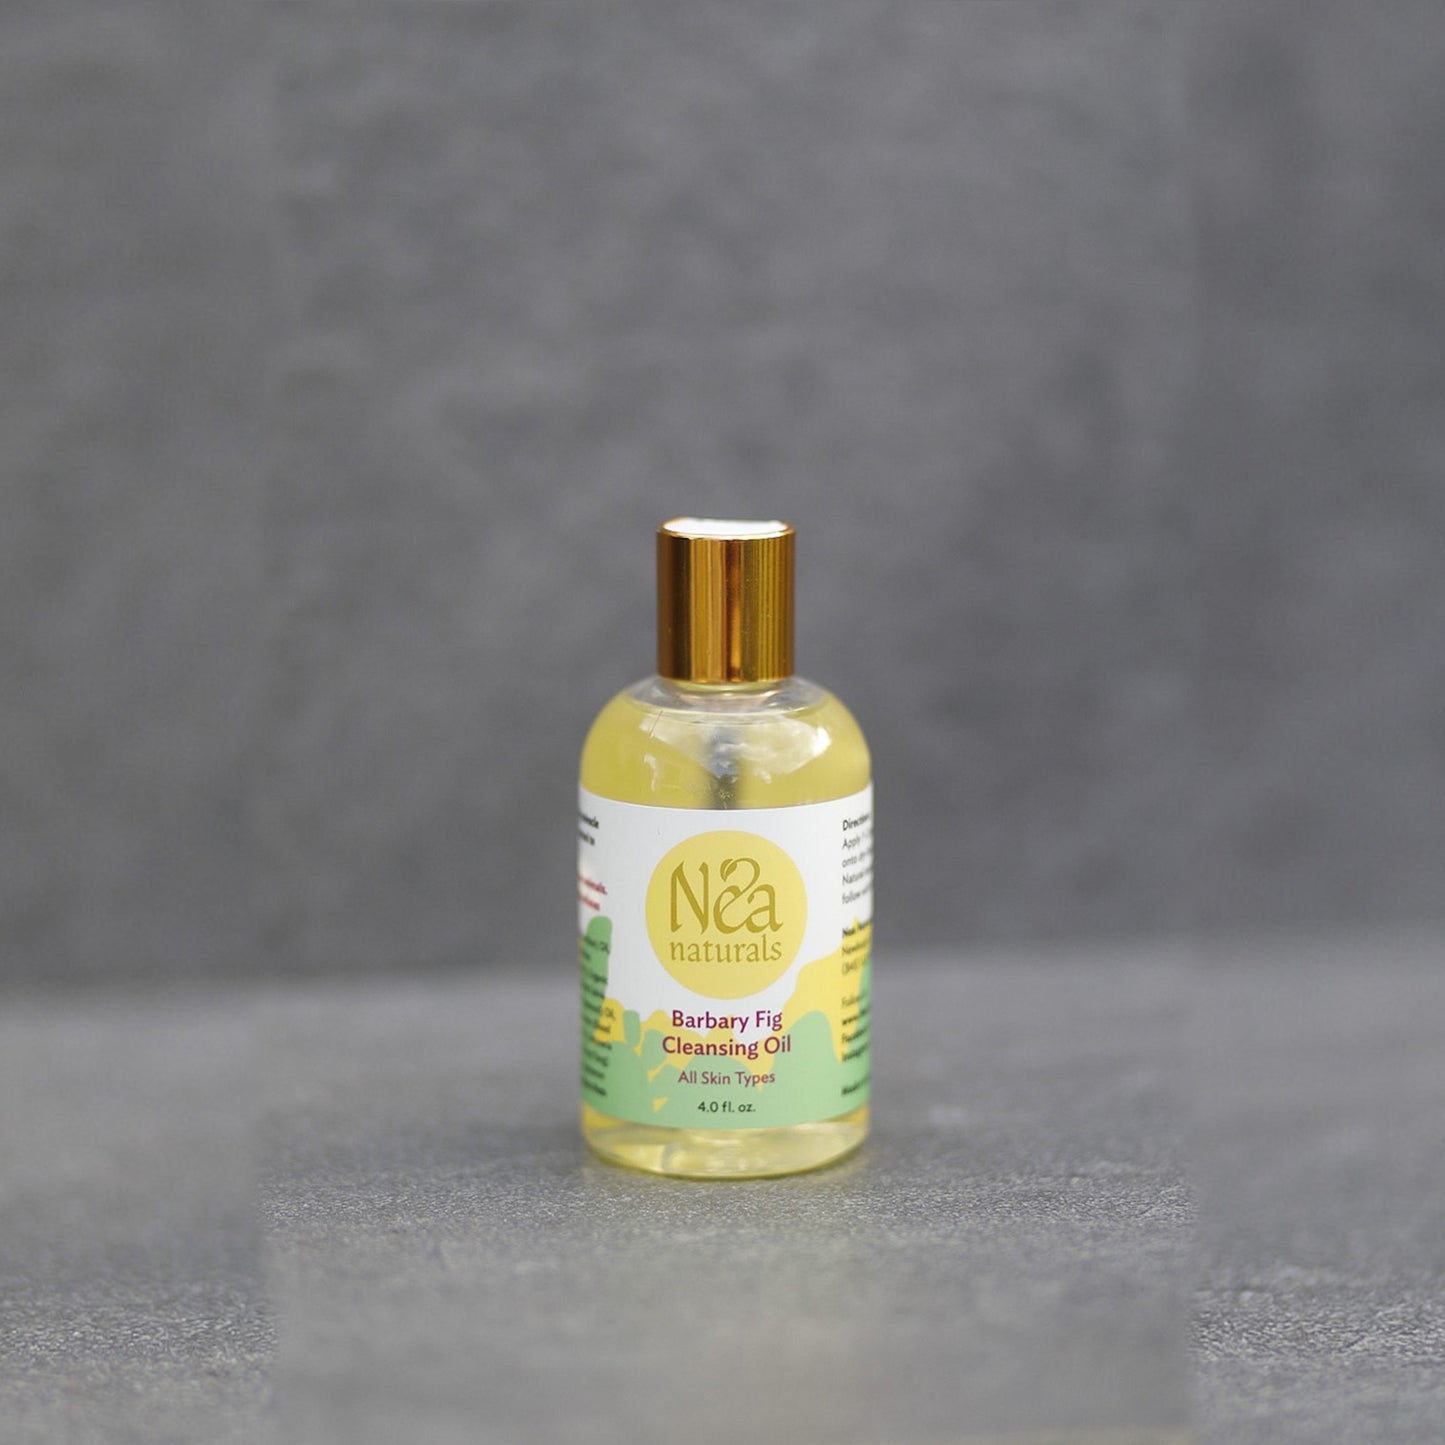 Barbary Fig Cleansing Oil